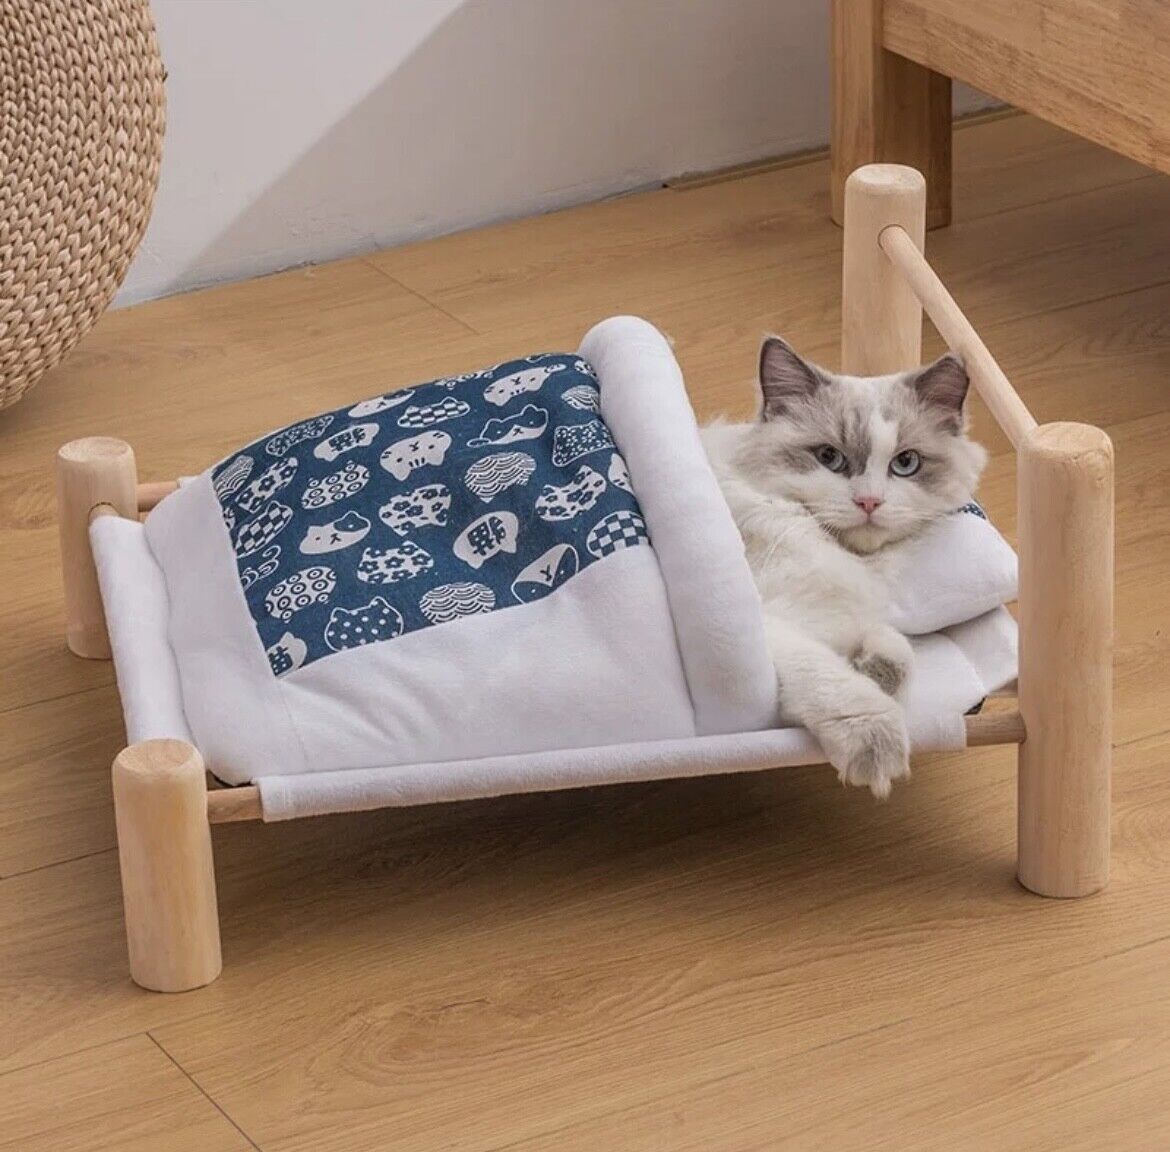 Cute Wooden Bed for Cats with blanket, pillow, toy cotton ball